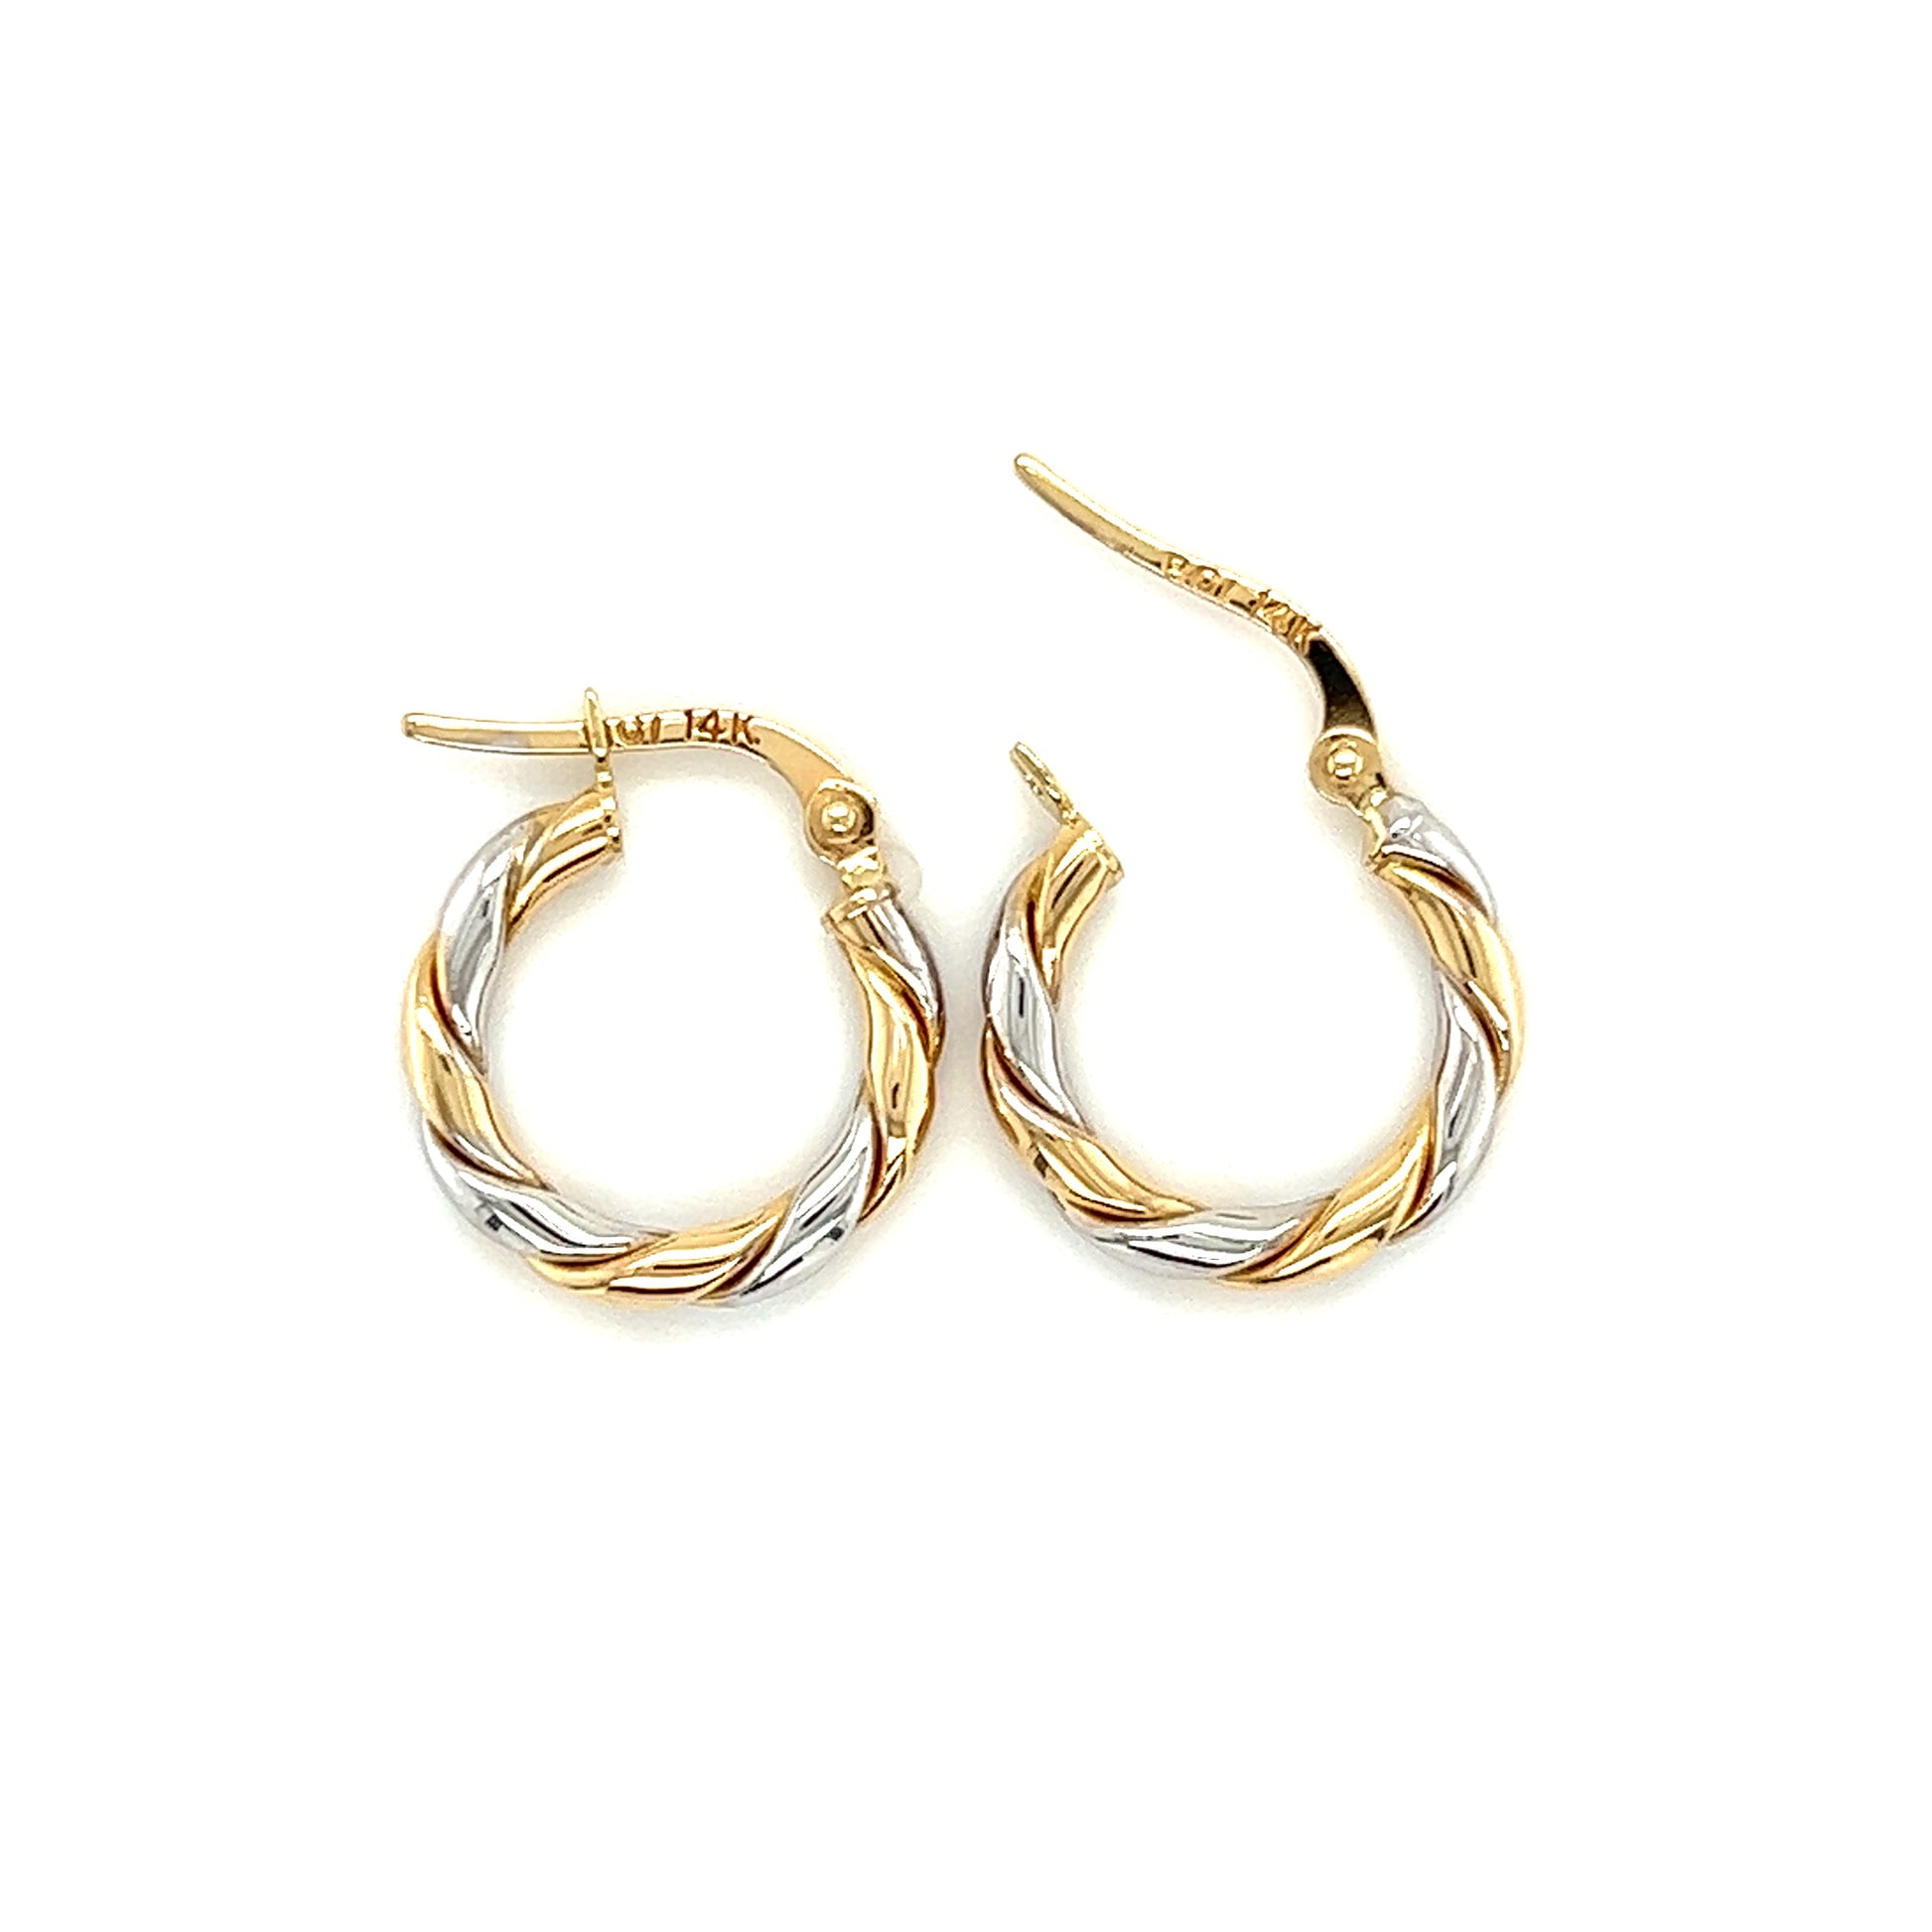 Twisted Hoop Earrings 15mm in 14K White and Yellow Gold Top View with Open Clasp